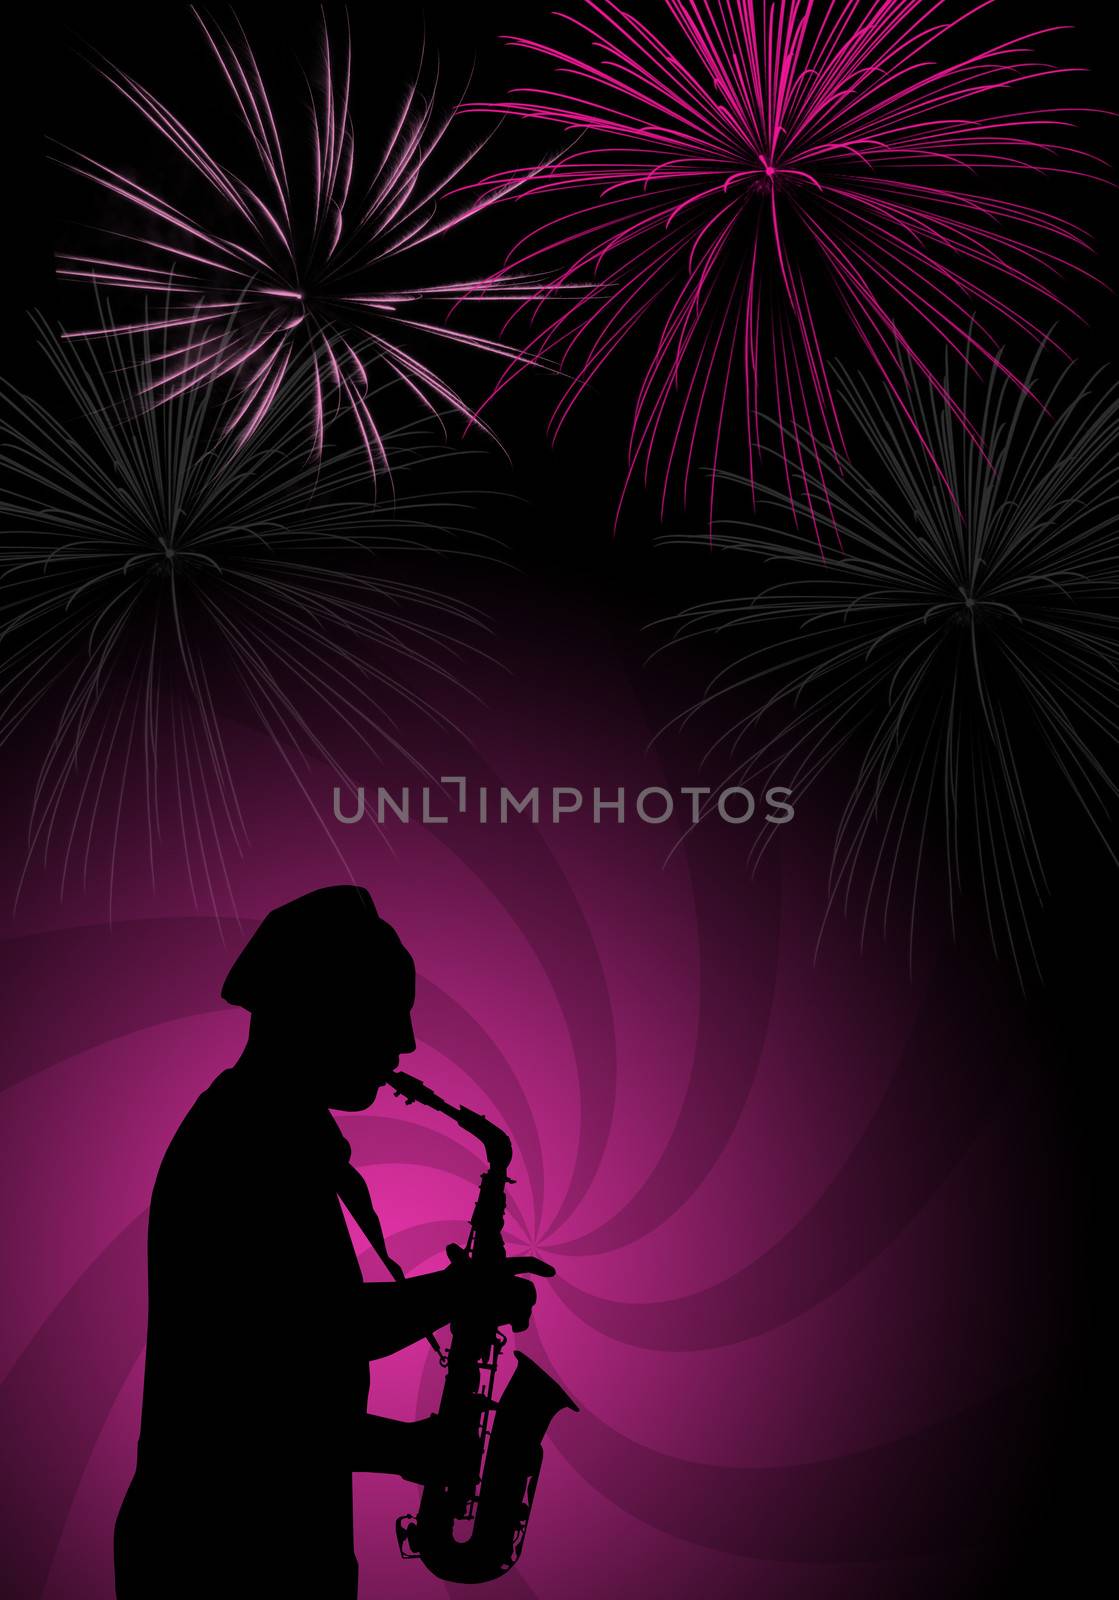 saxophonist with fireworks by sognolucido